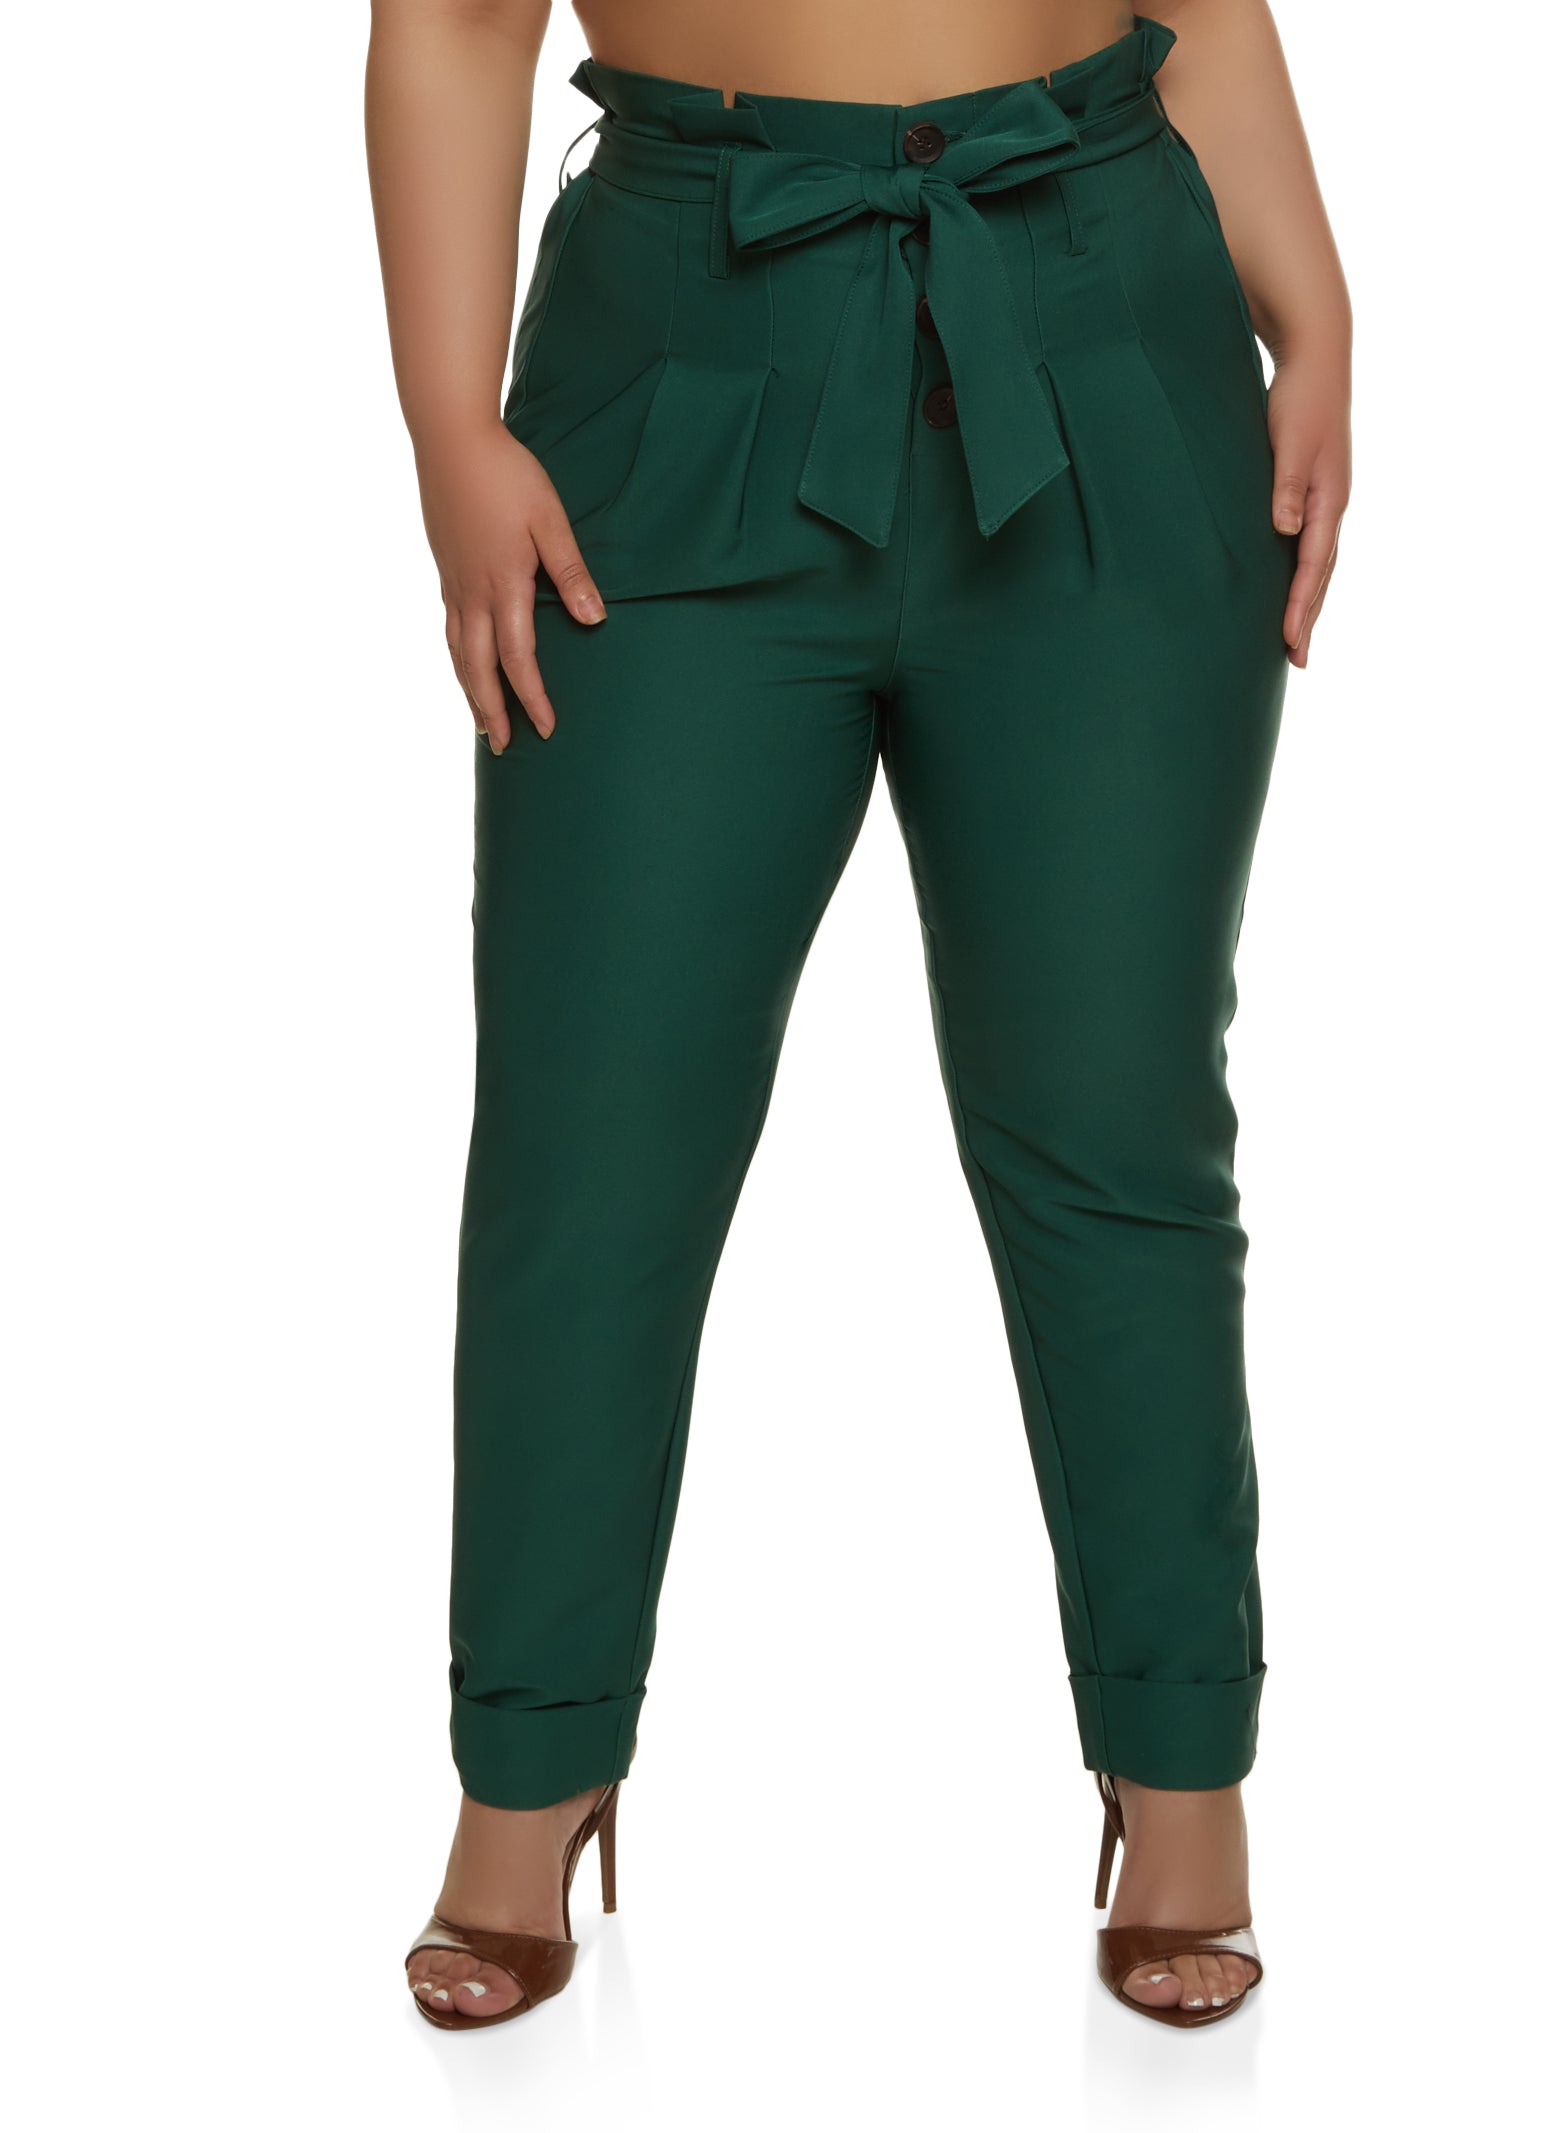 ALLEGRACE Plus Size Pants for Women Work Business Casual Skinny High Waisted  Capri Pants 661_Army Green 26W at  Women's Clothing store